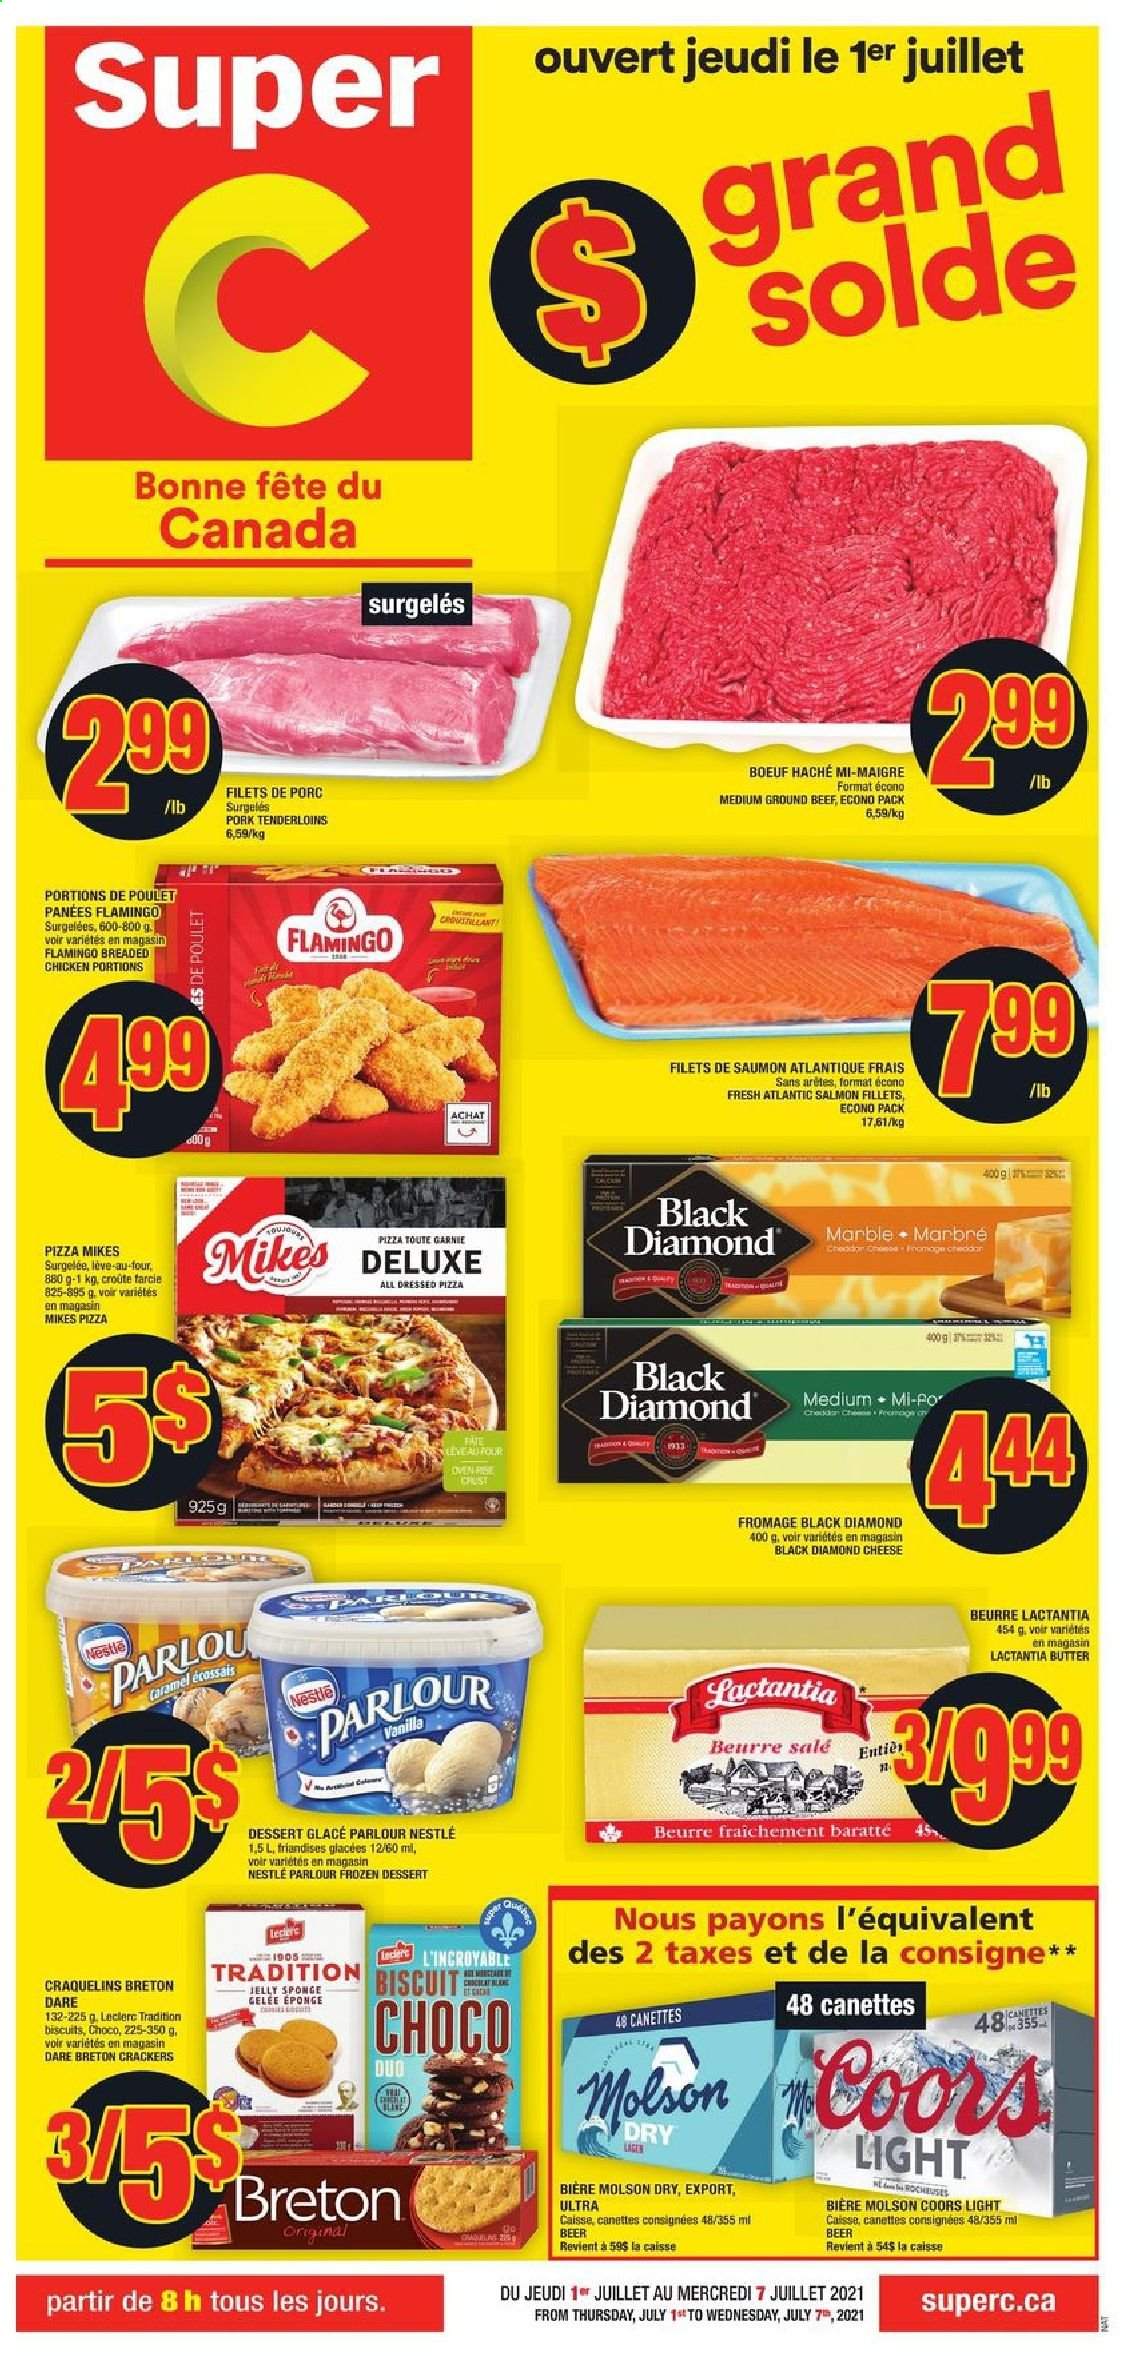 thumbnail - Super C Flyer - July 01, 2021 - July 07, 2021 - Sales products - salmon, salmon fillet, pizza, butter, jelly, crackers, biscuit, caramel, beer, Coors, beef meat, ground beef, pork tenderloin, Nestlé. Page 1.